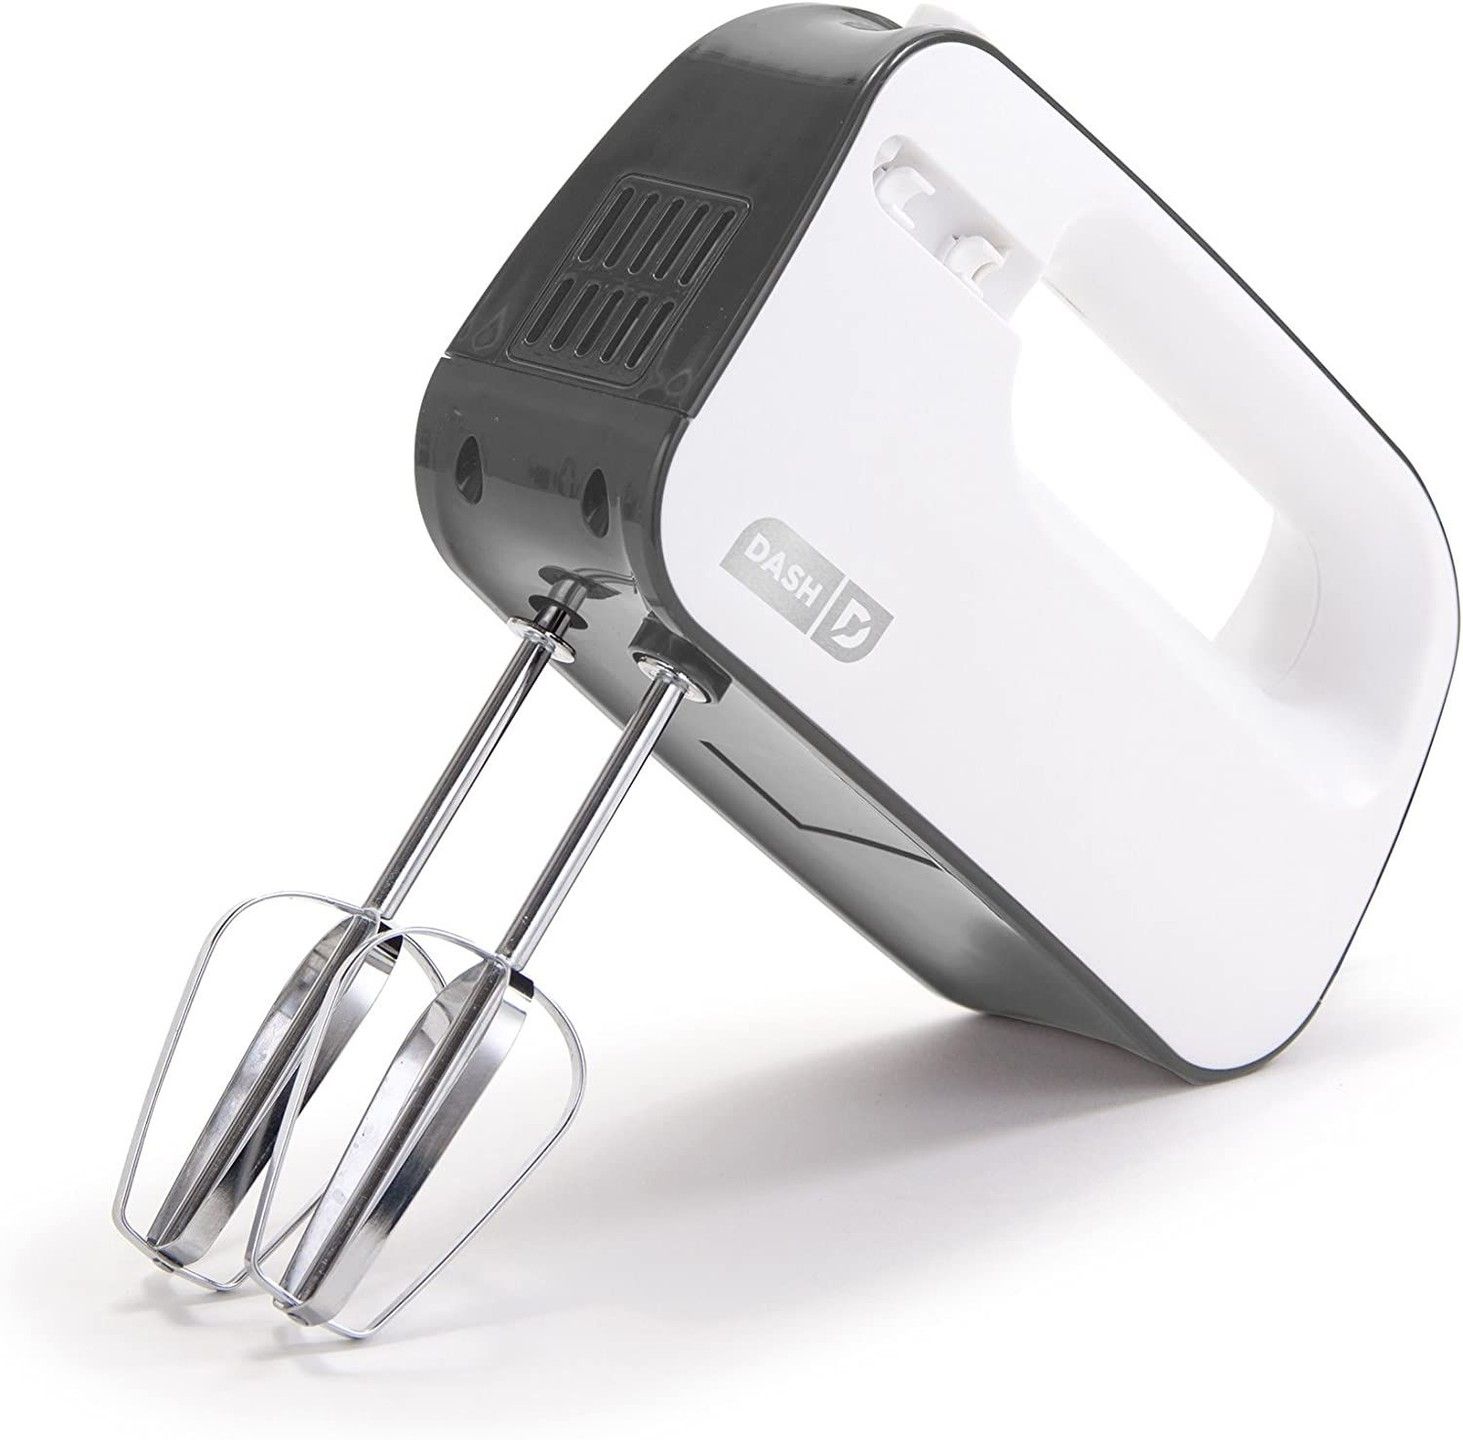 Dash Smart Store Compact Hand Mixer - Electric